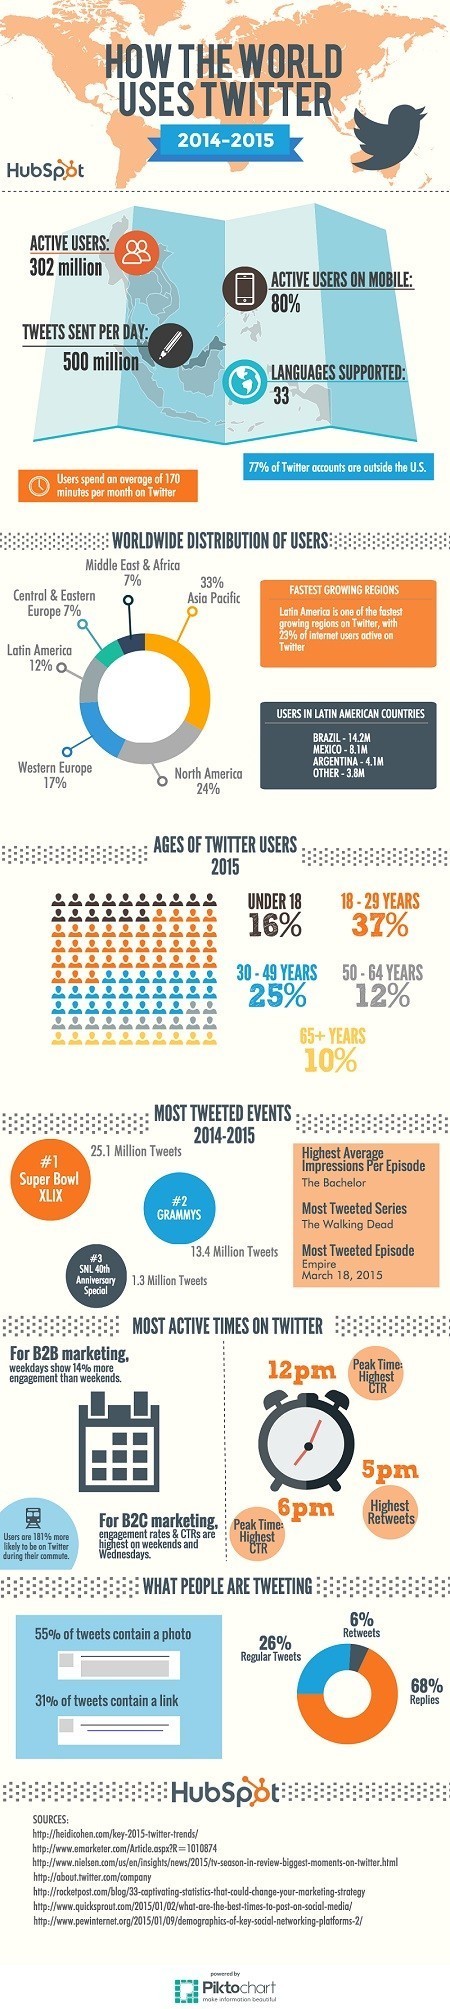 How the World Uses Twitter [Infographic] | Information Technology & Social Media News | Scoop.it